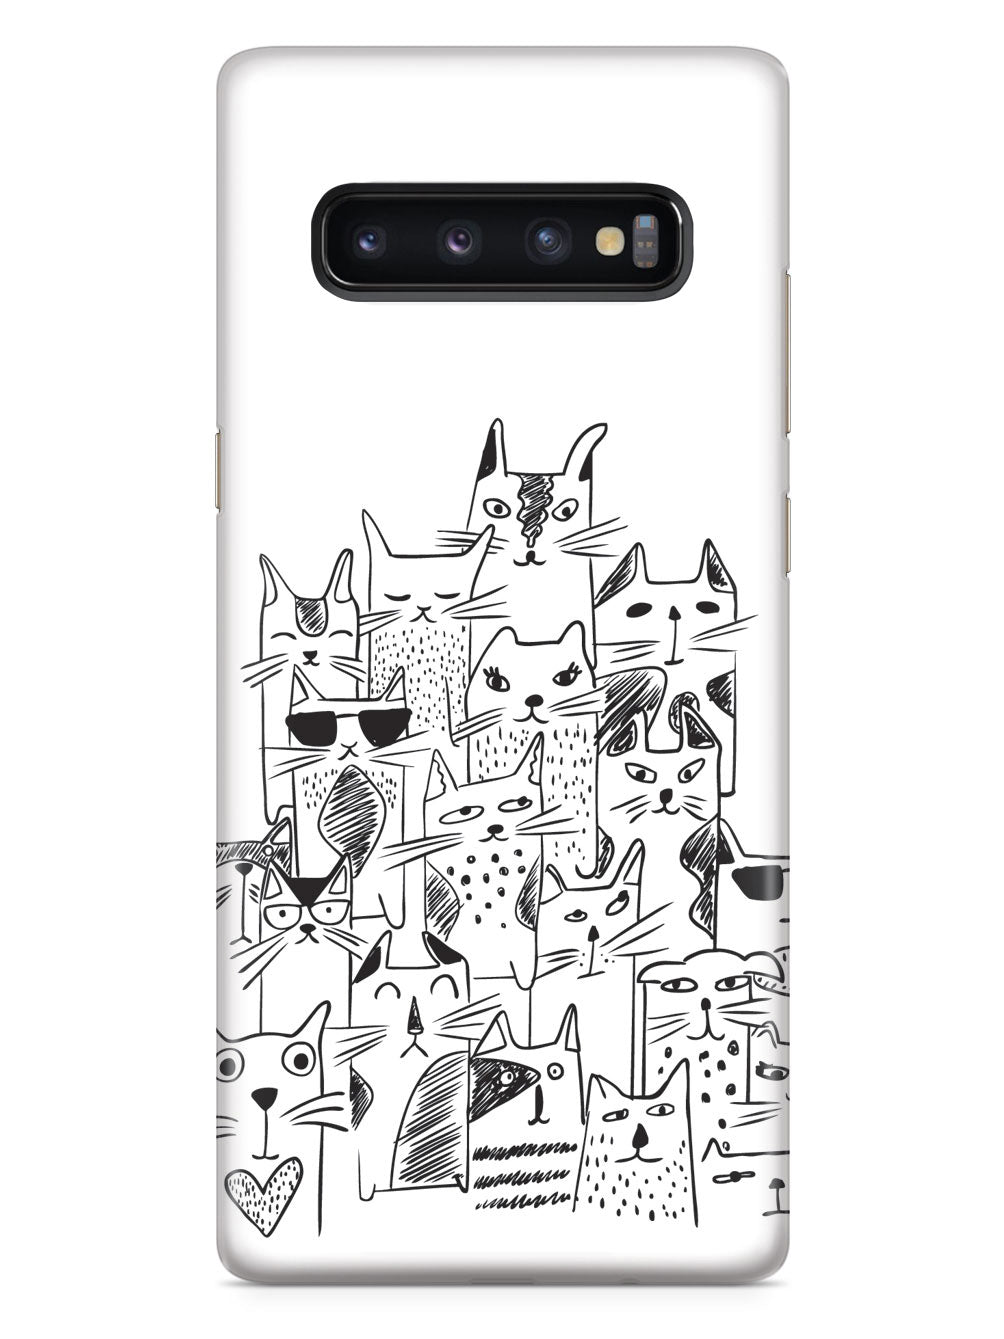 Stack O' Cats Case